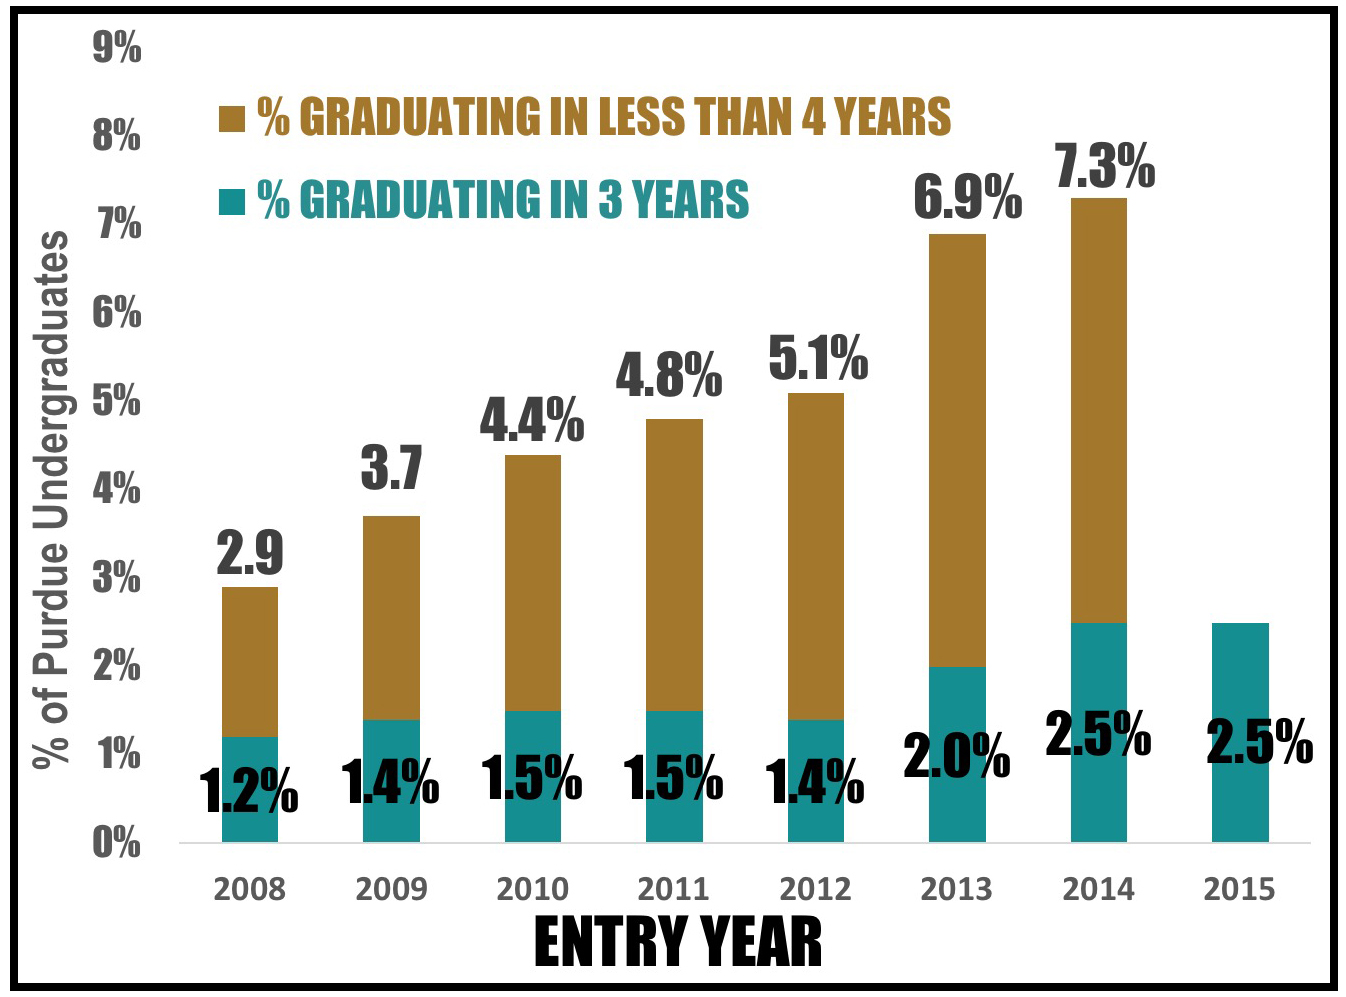 More than 7% of Boilermakers graduate in less than 4 years